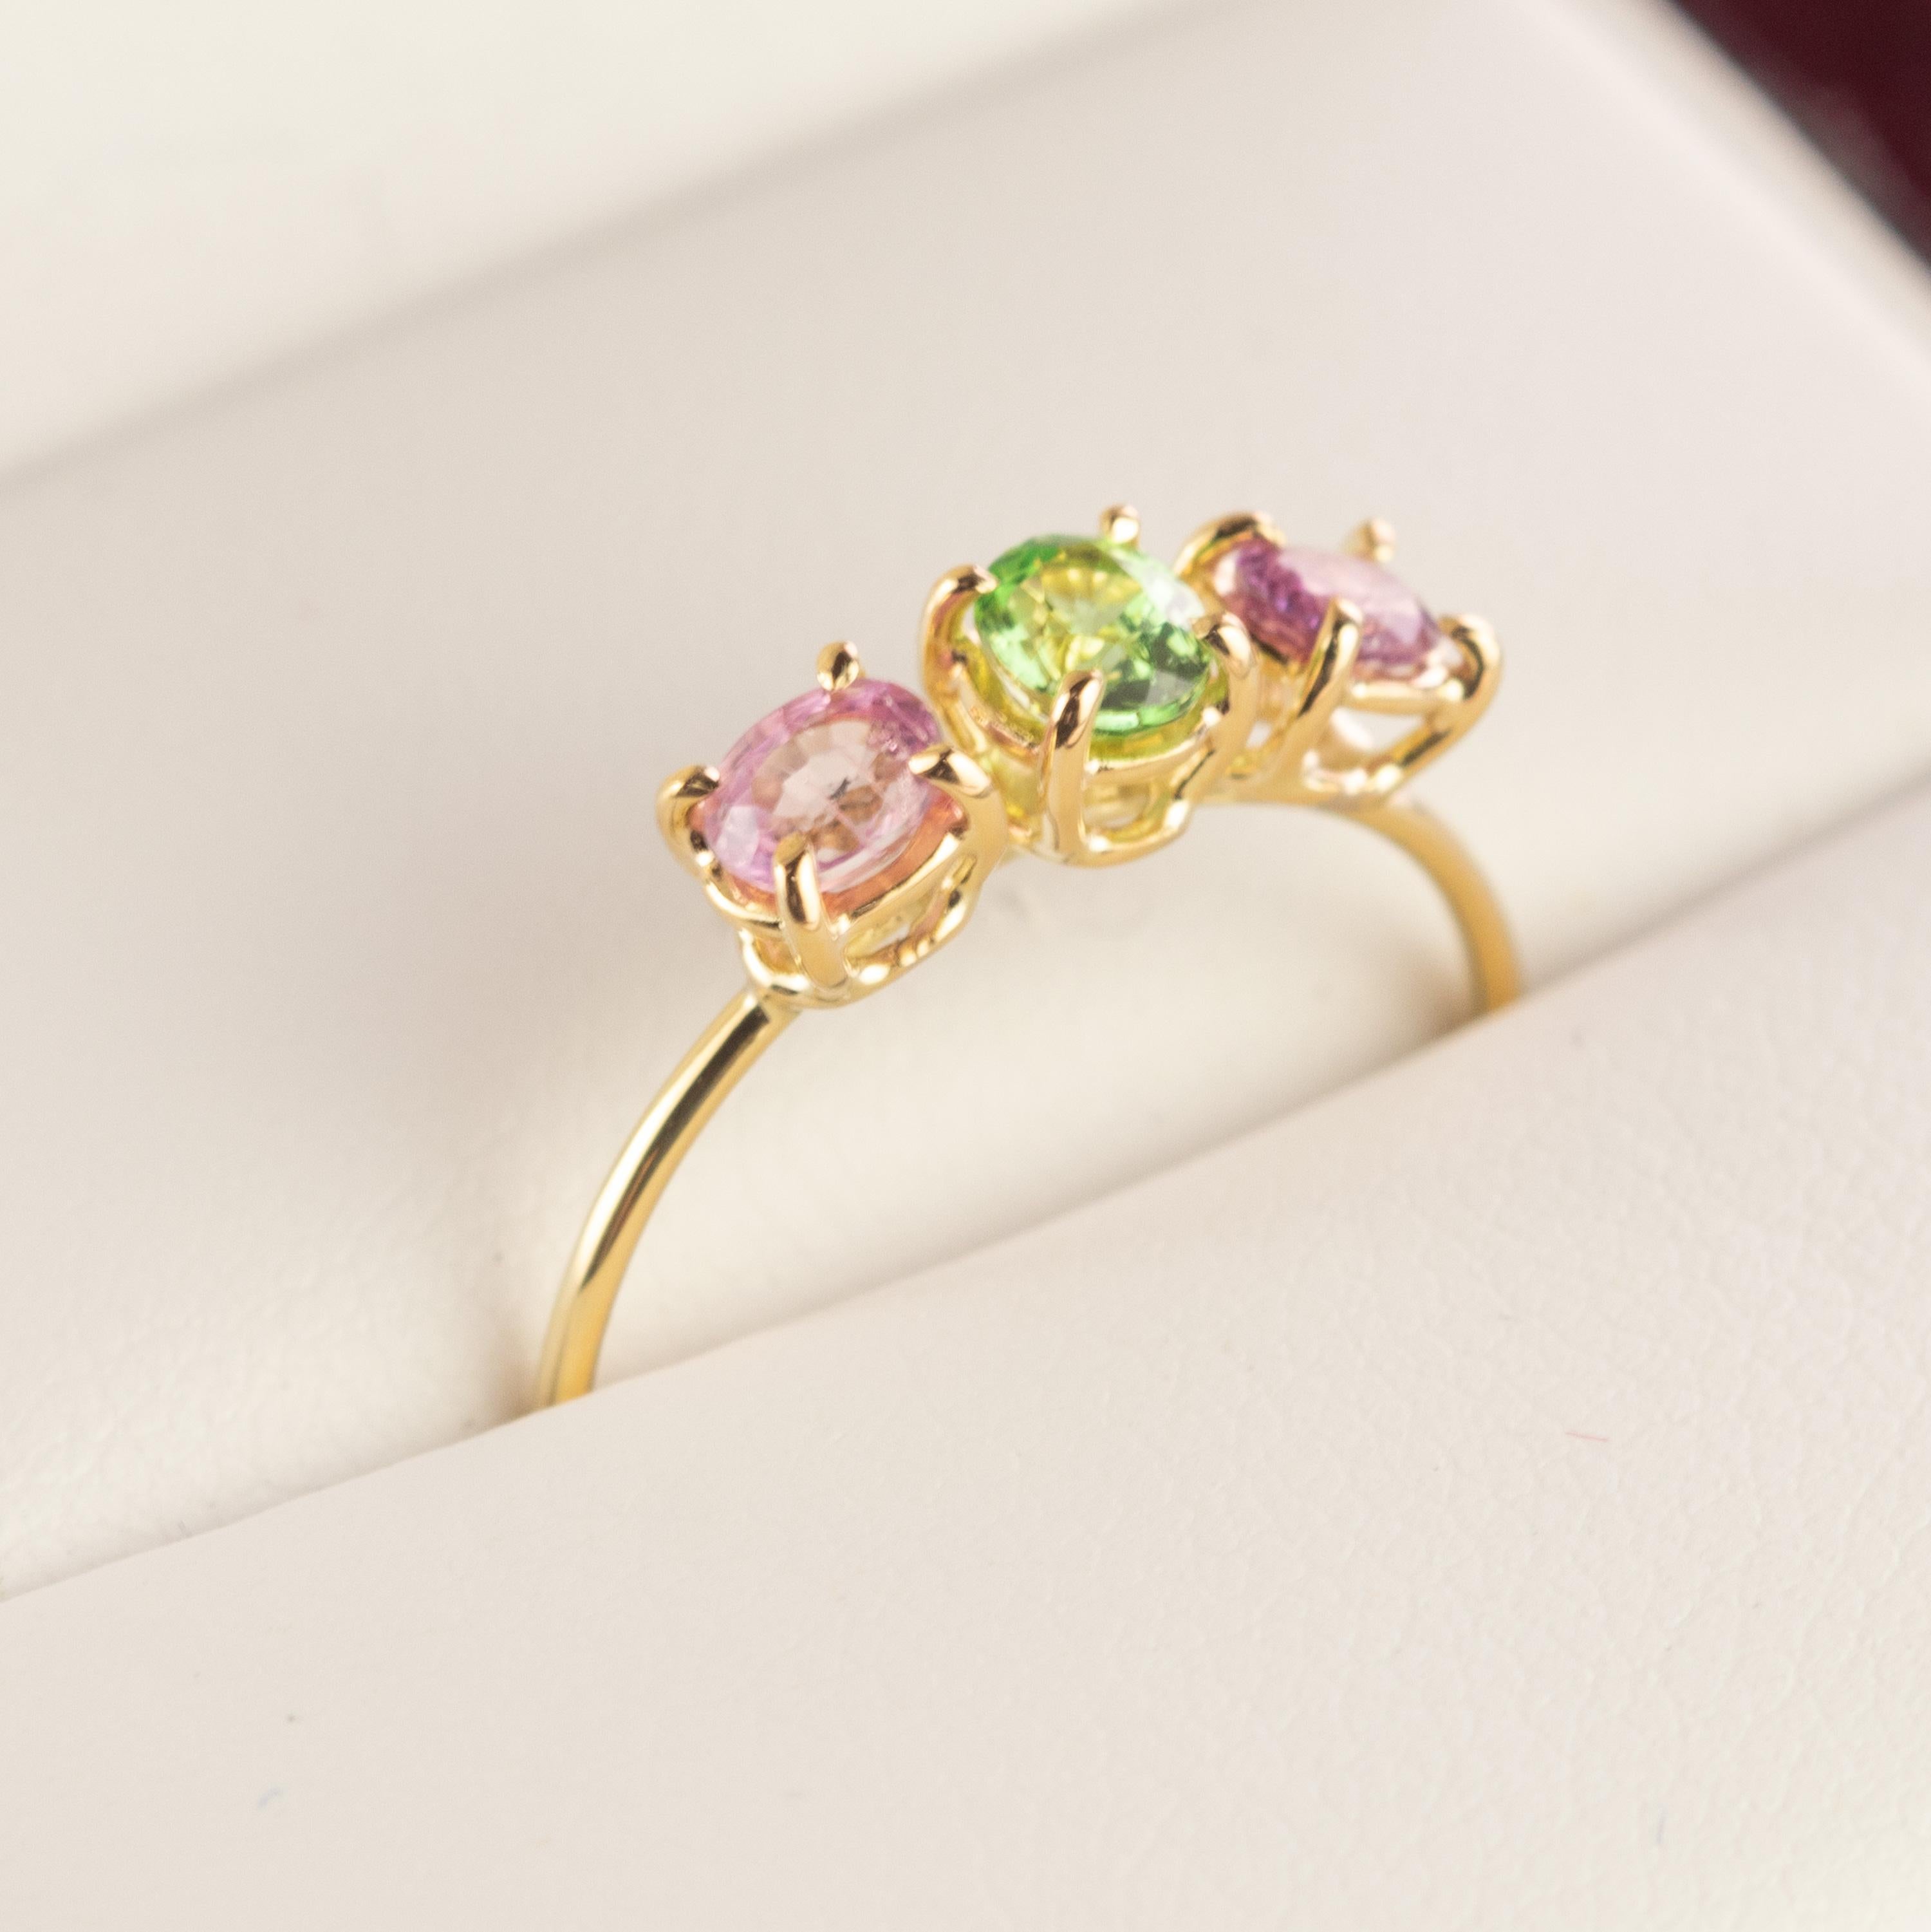 Marvelous handmade 18 karat yellow gold trilogy thin ring embellished with stunning pink sapphires and tsavorite. Open your intuition and enhance your senses to love. The three bands depict fidelity, friendship and love, which has made Trinity an